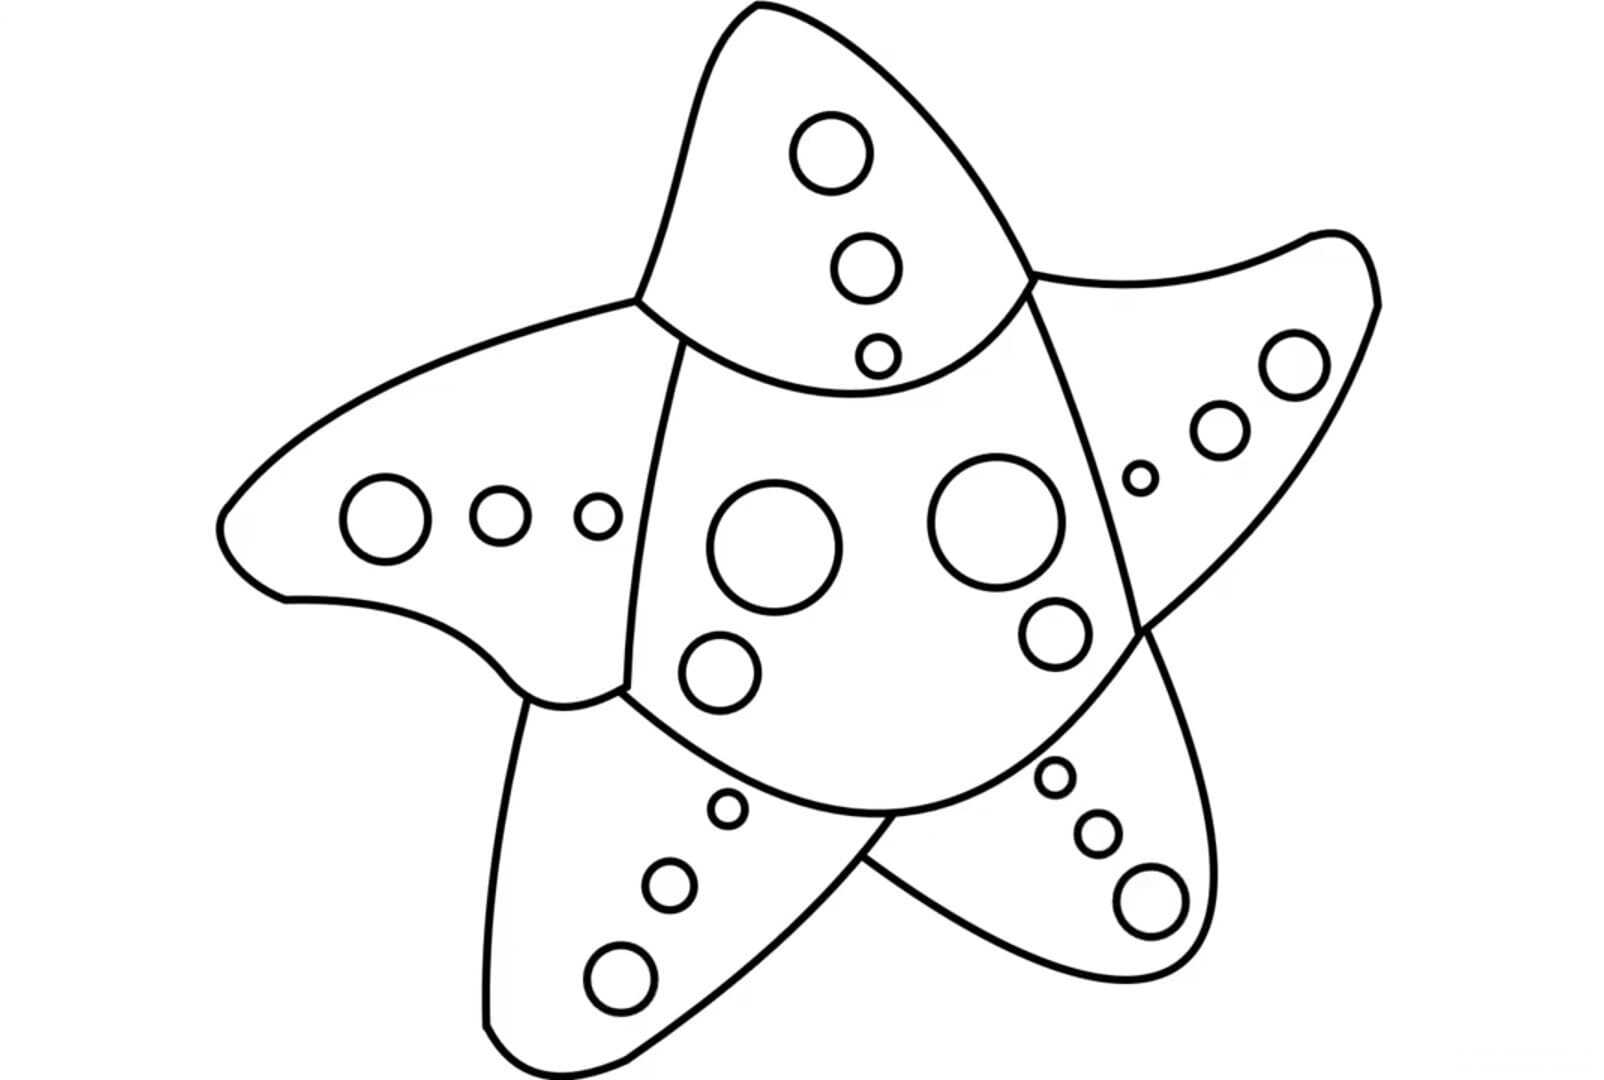 Adopt me Starfish has three spots on each arm Coloring Page